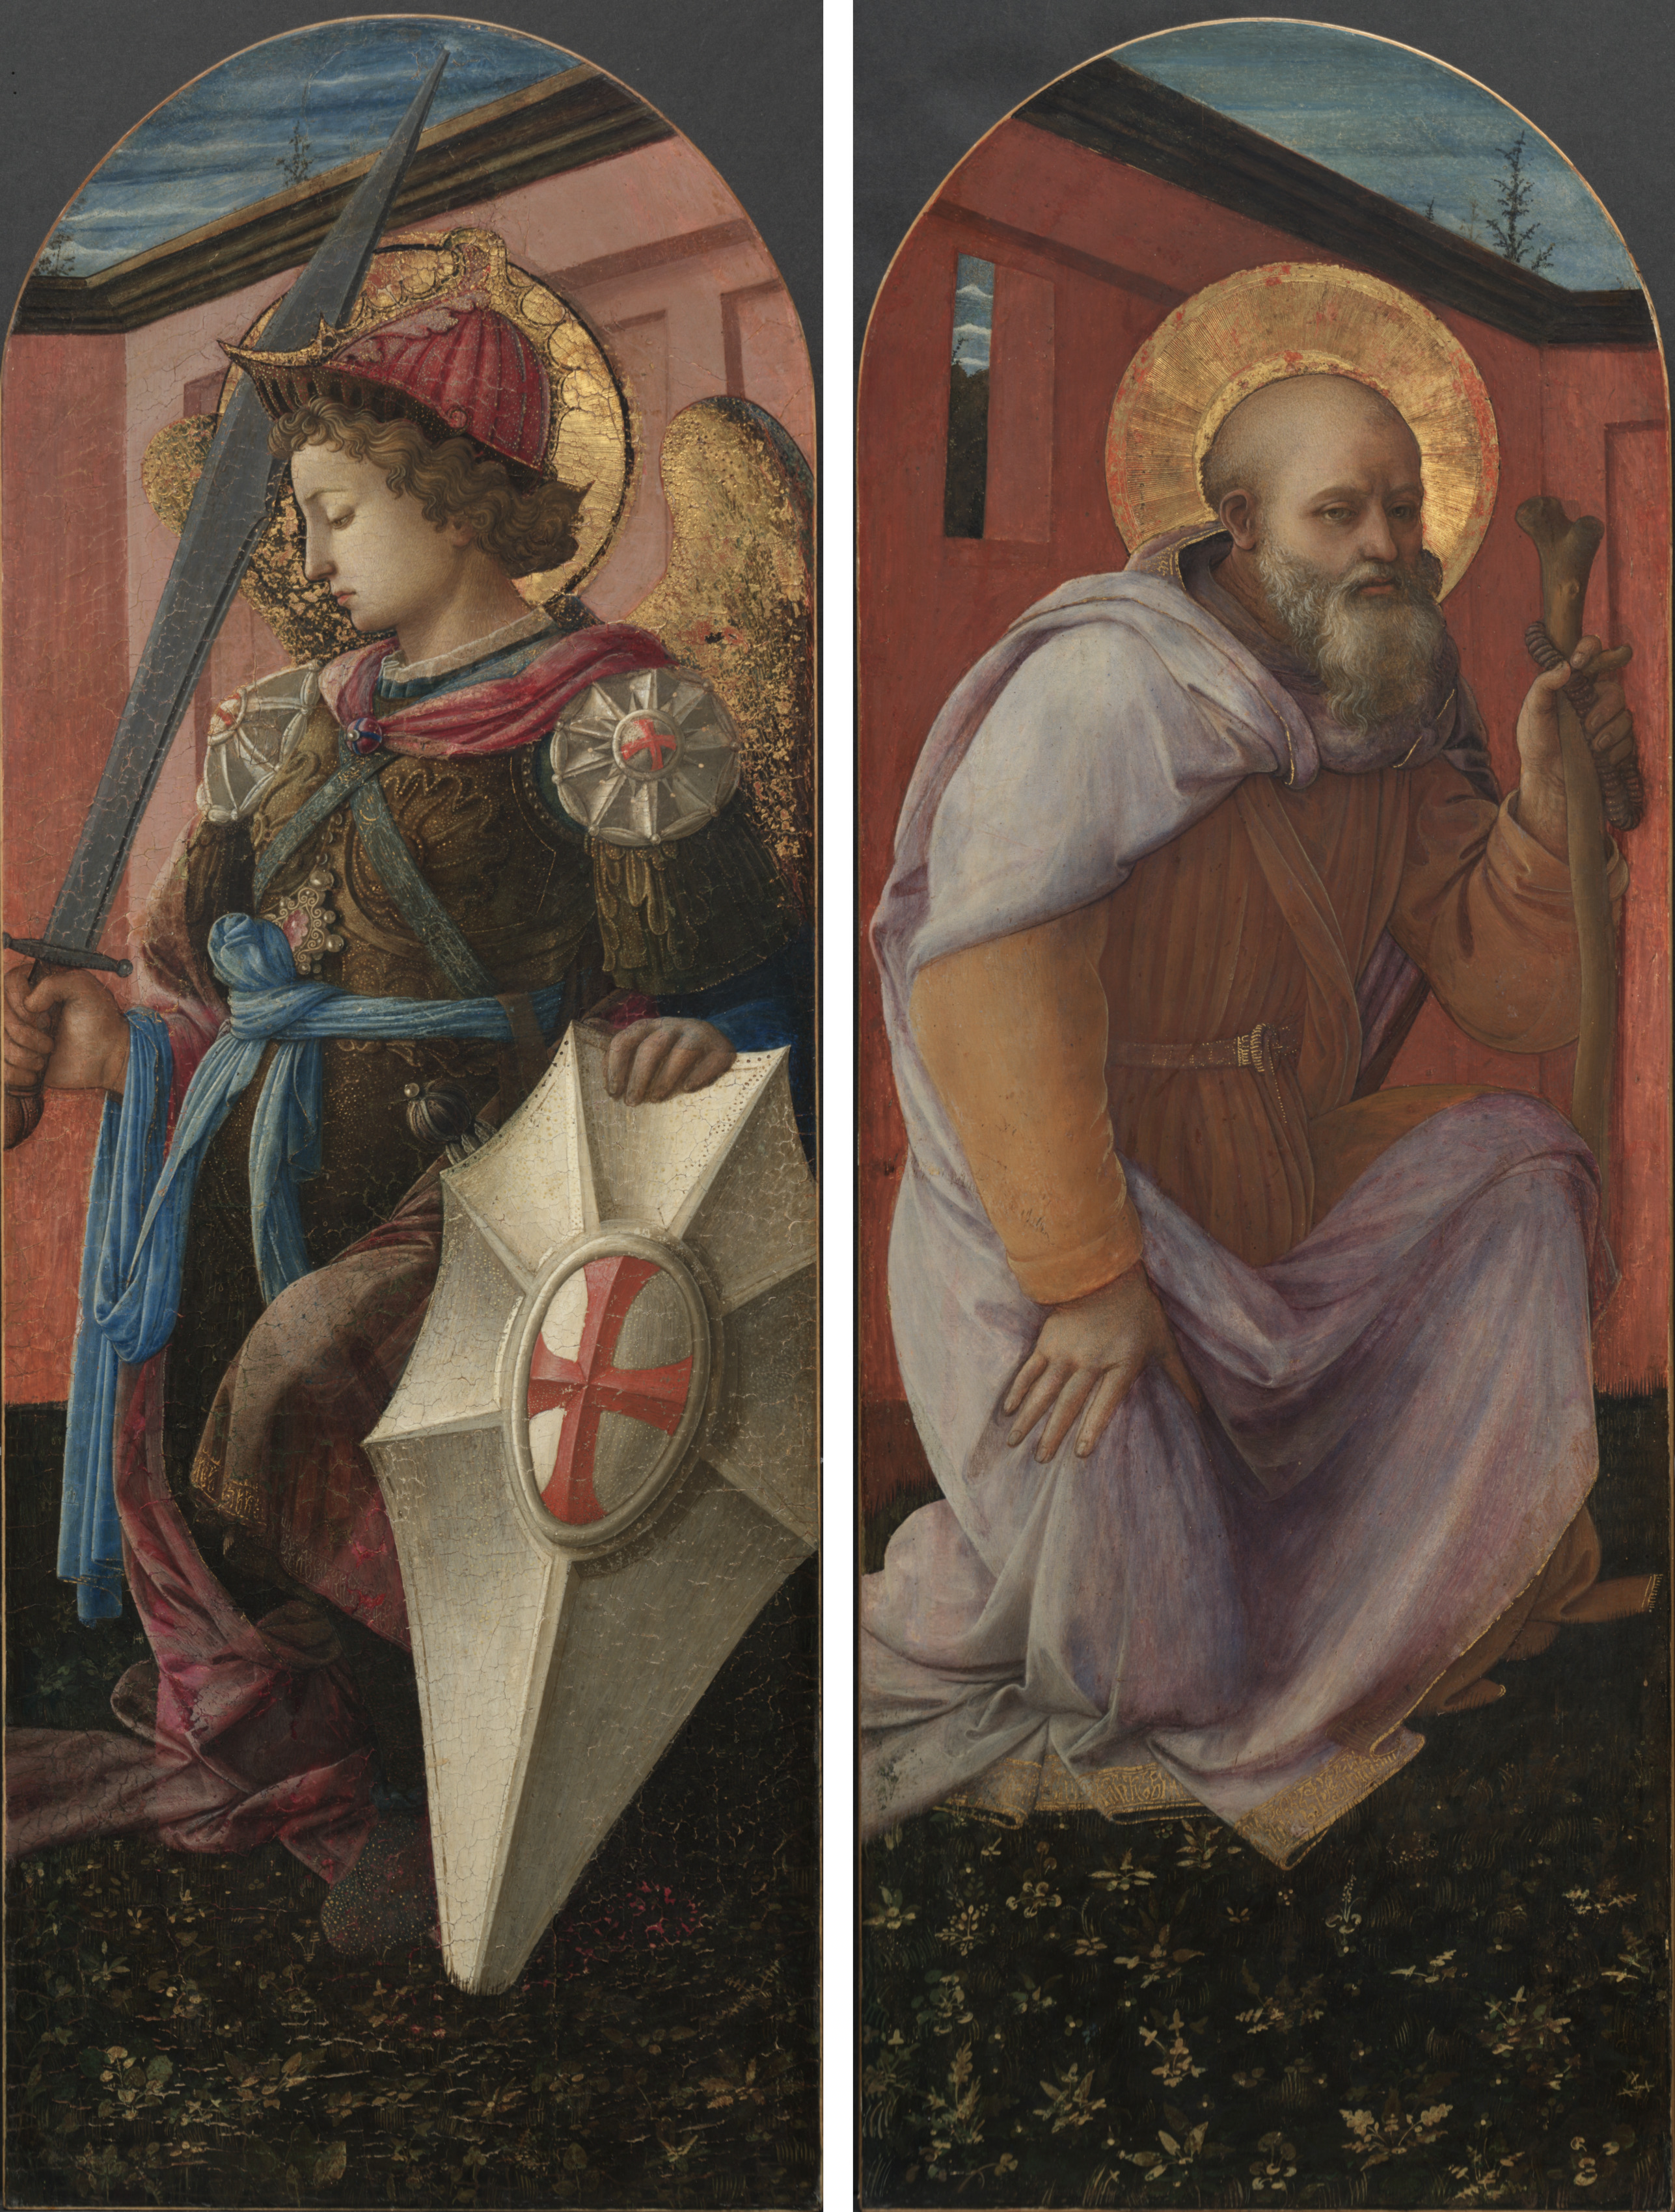 Pair of Panels from a Triptych: The Archangel Michael and St. Anthony Abbot